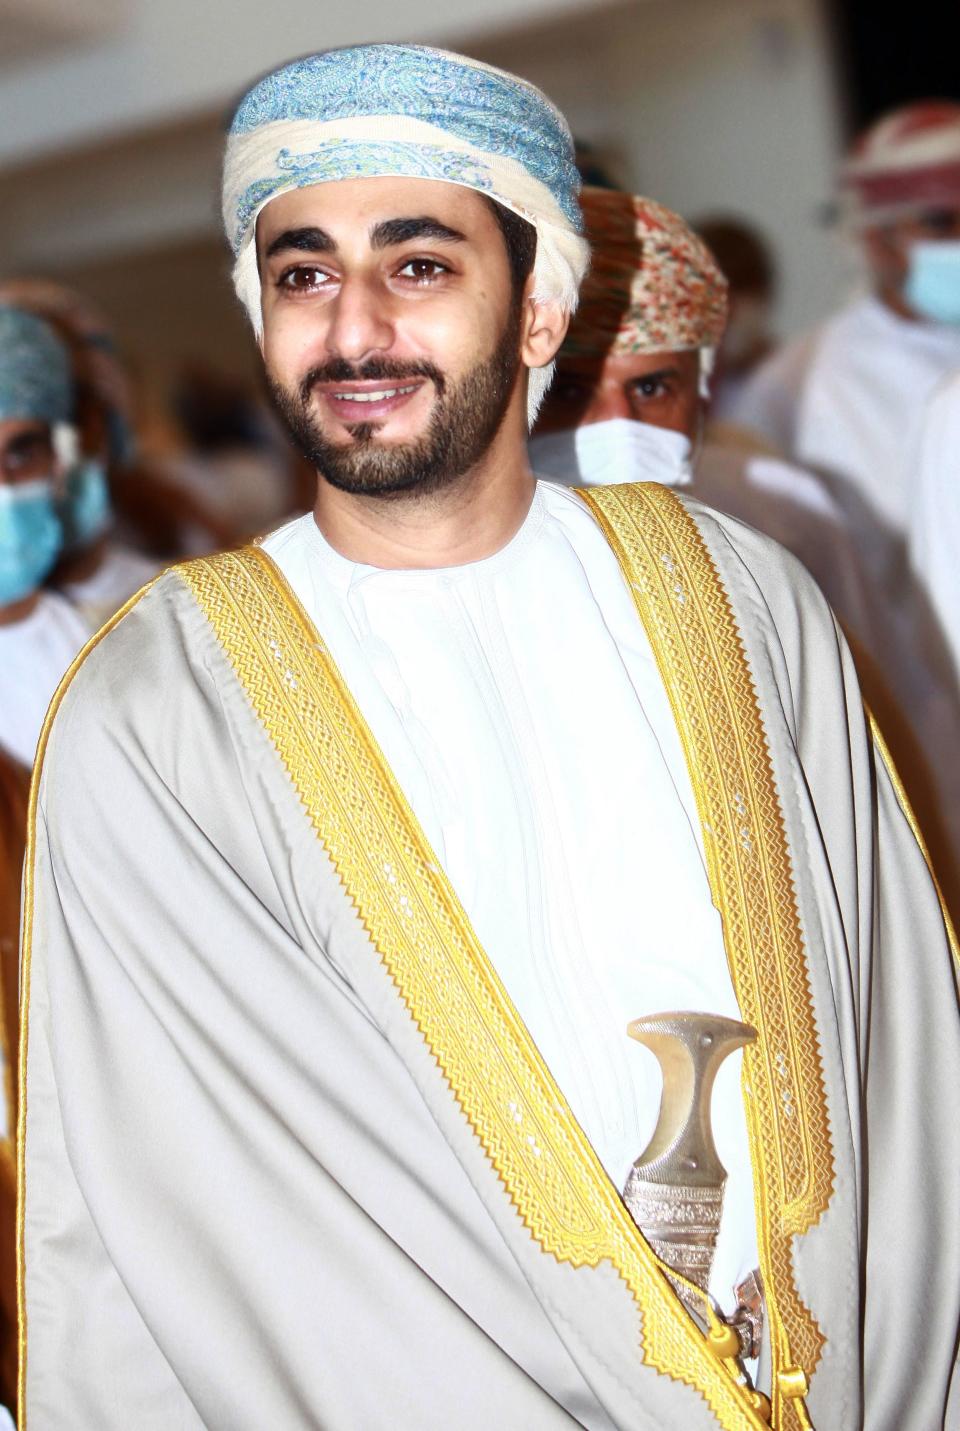 the sultan's son smiling